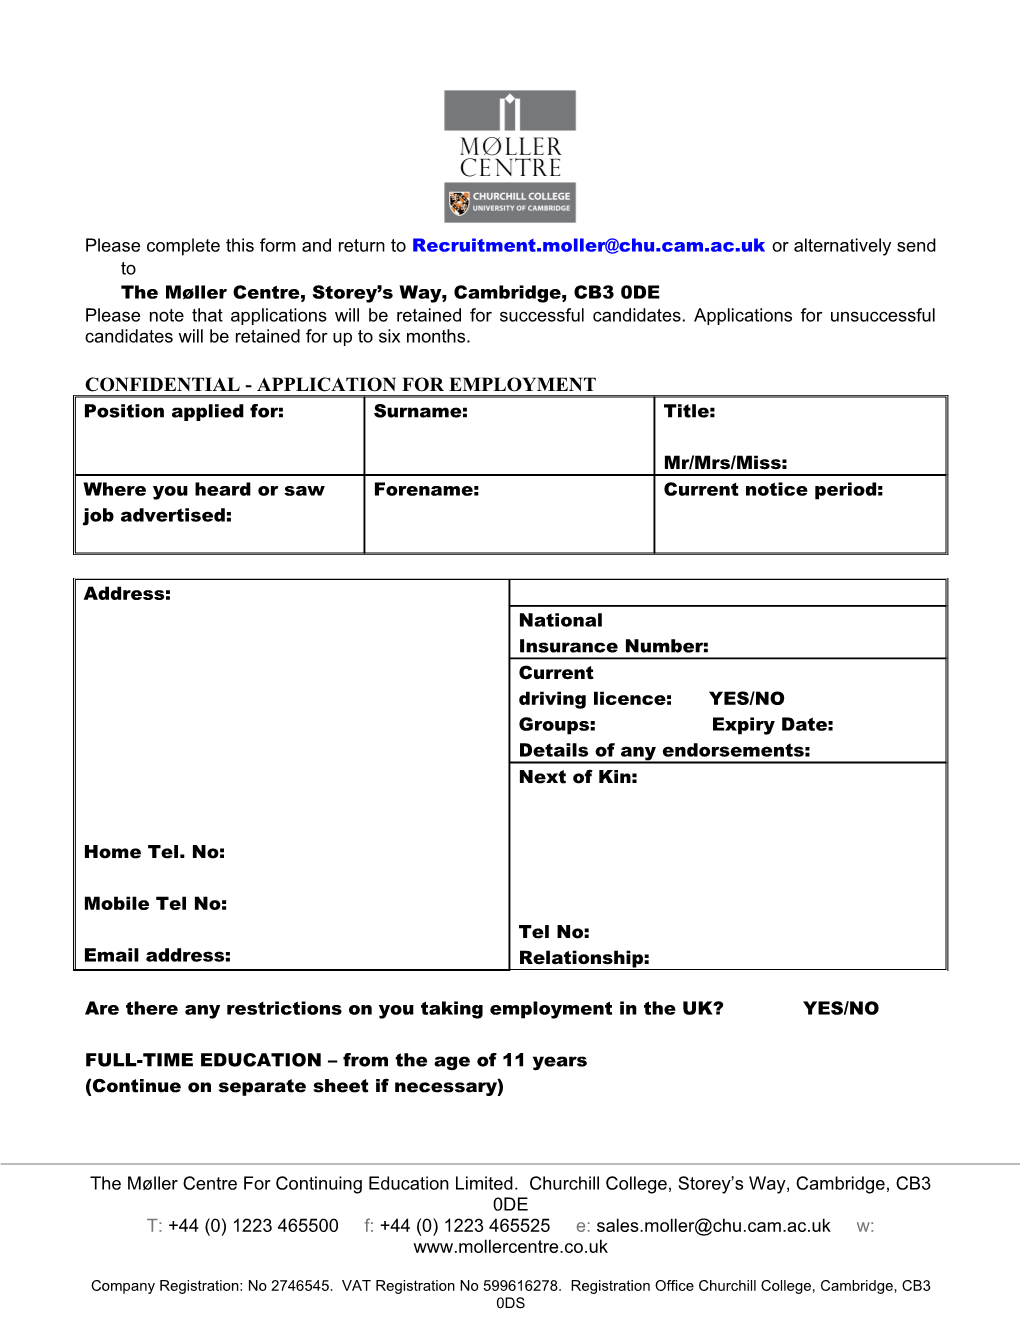 Confidential - Application for Employment